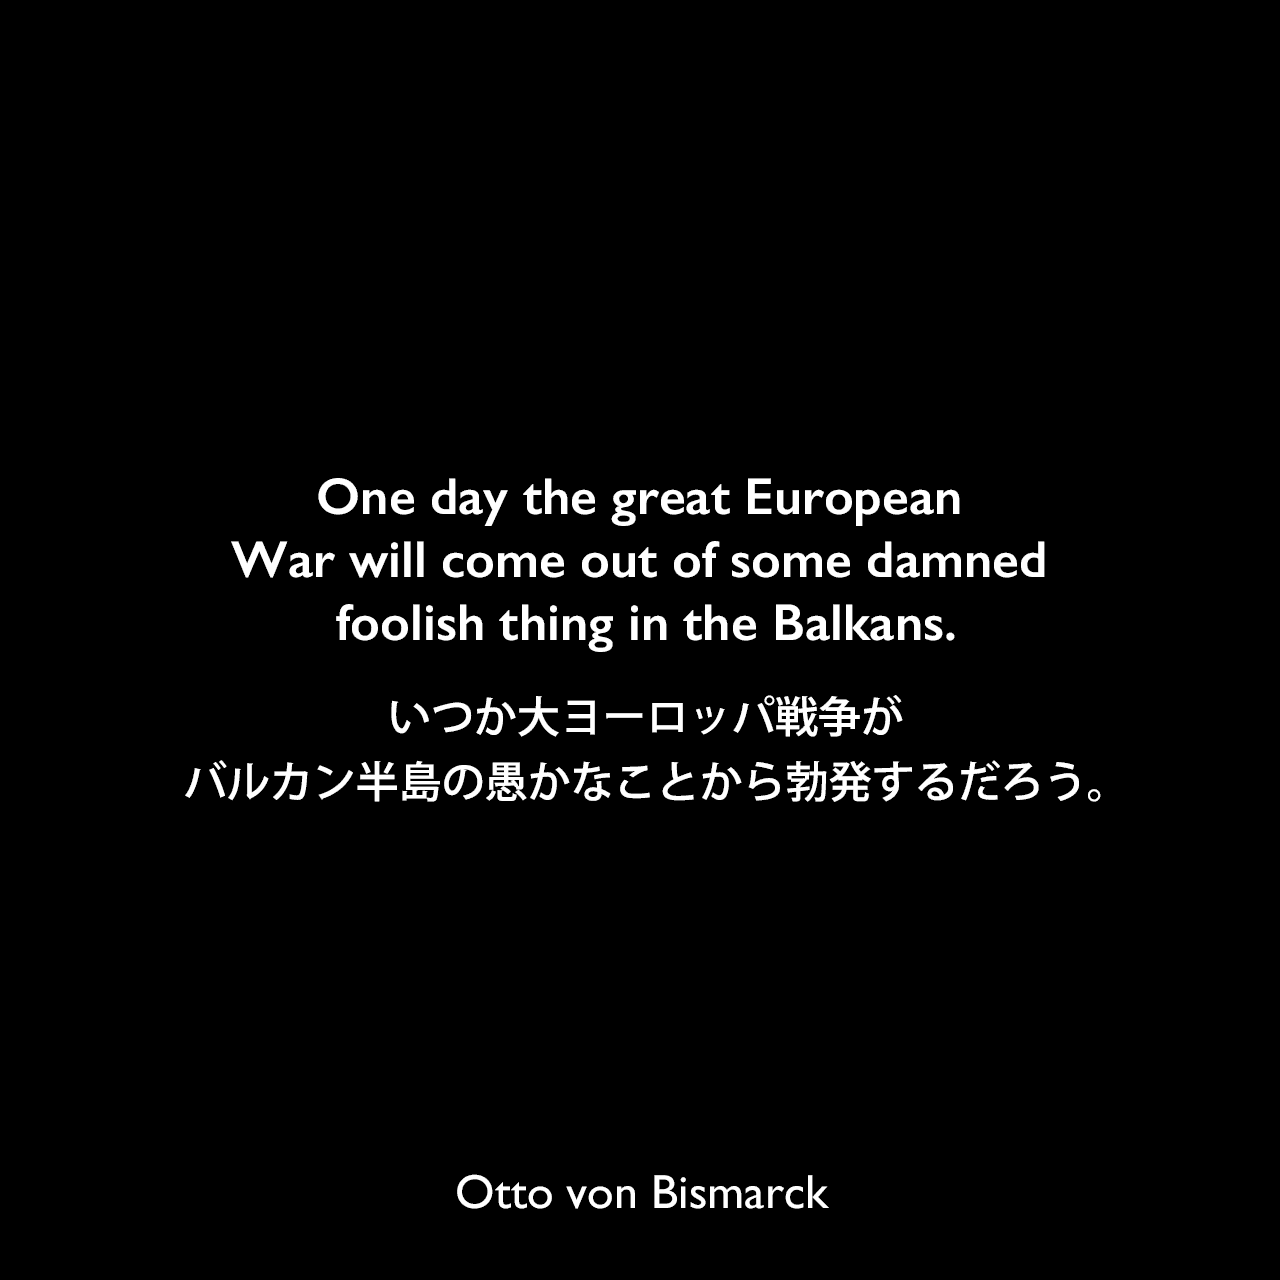 One day the great European War will come out of some damned foolish thing in the Balkans.いつか大ヨーロッパ戦争がバルカン半島の愚かなことから勃発するだろう。Otto von Bismarck